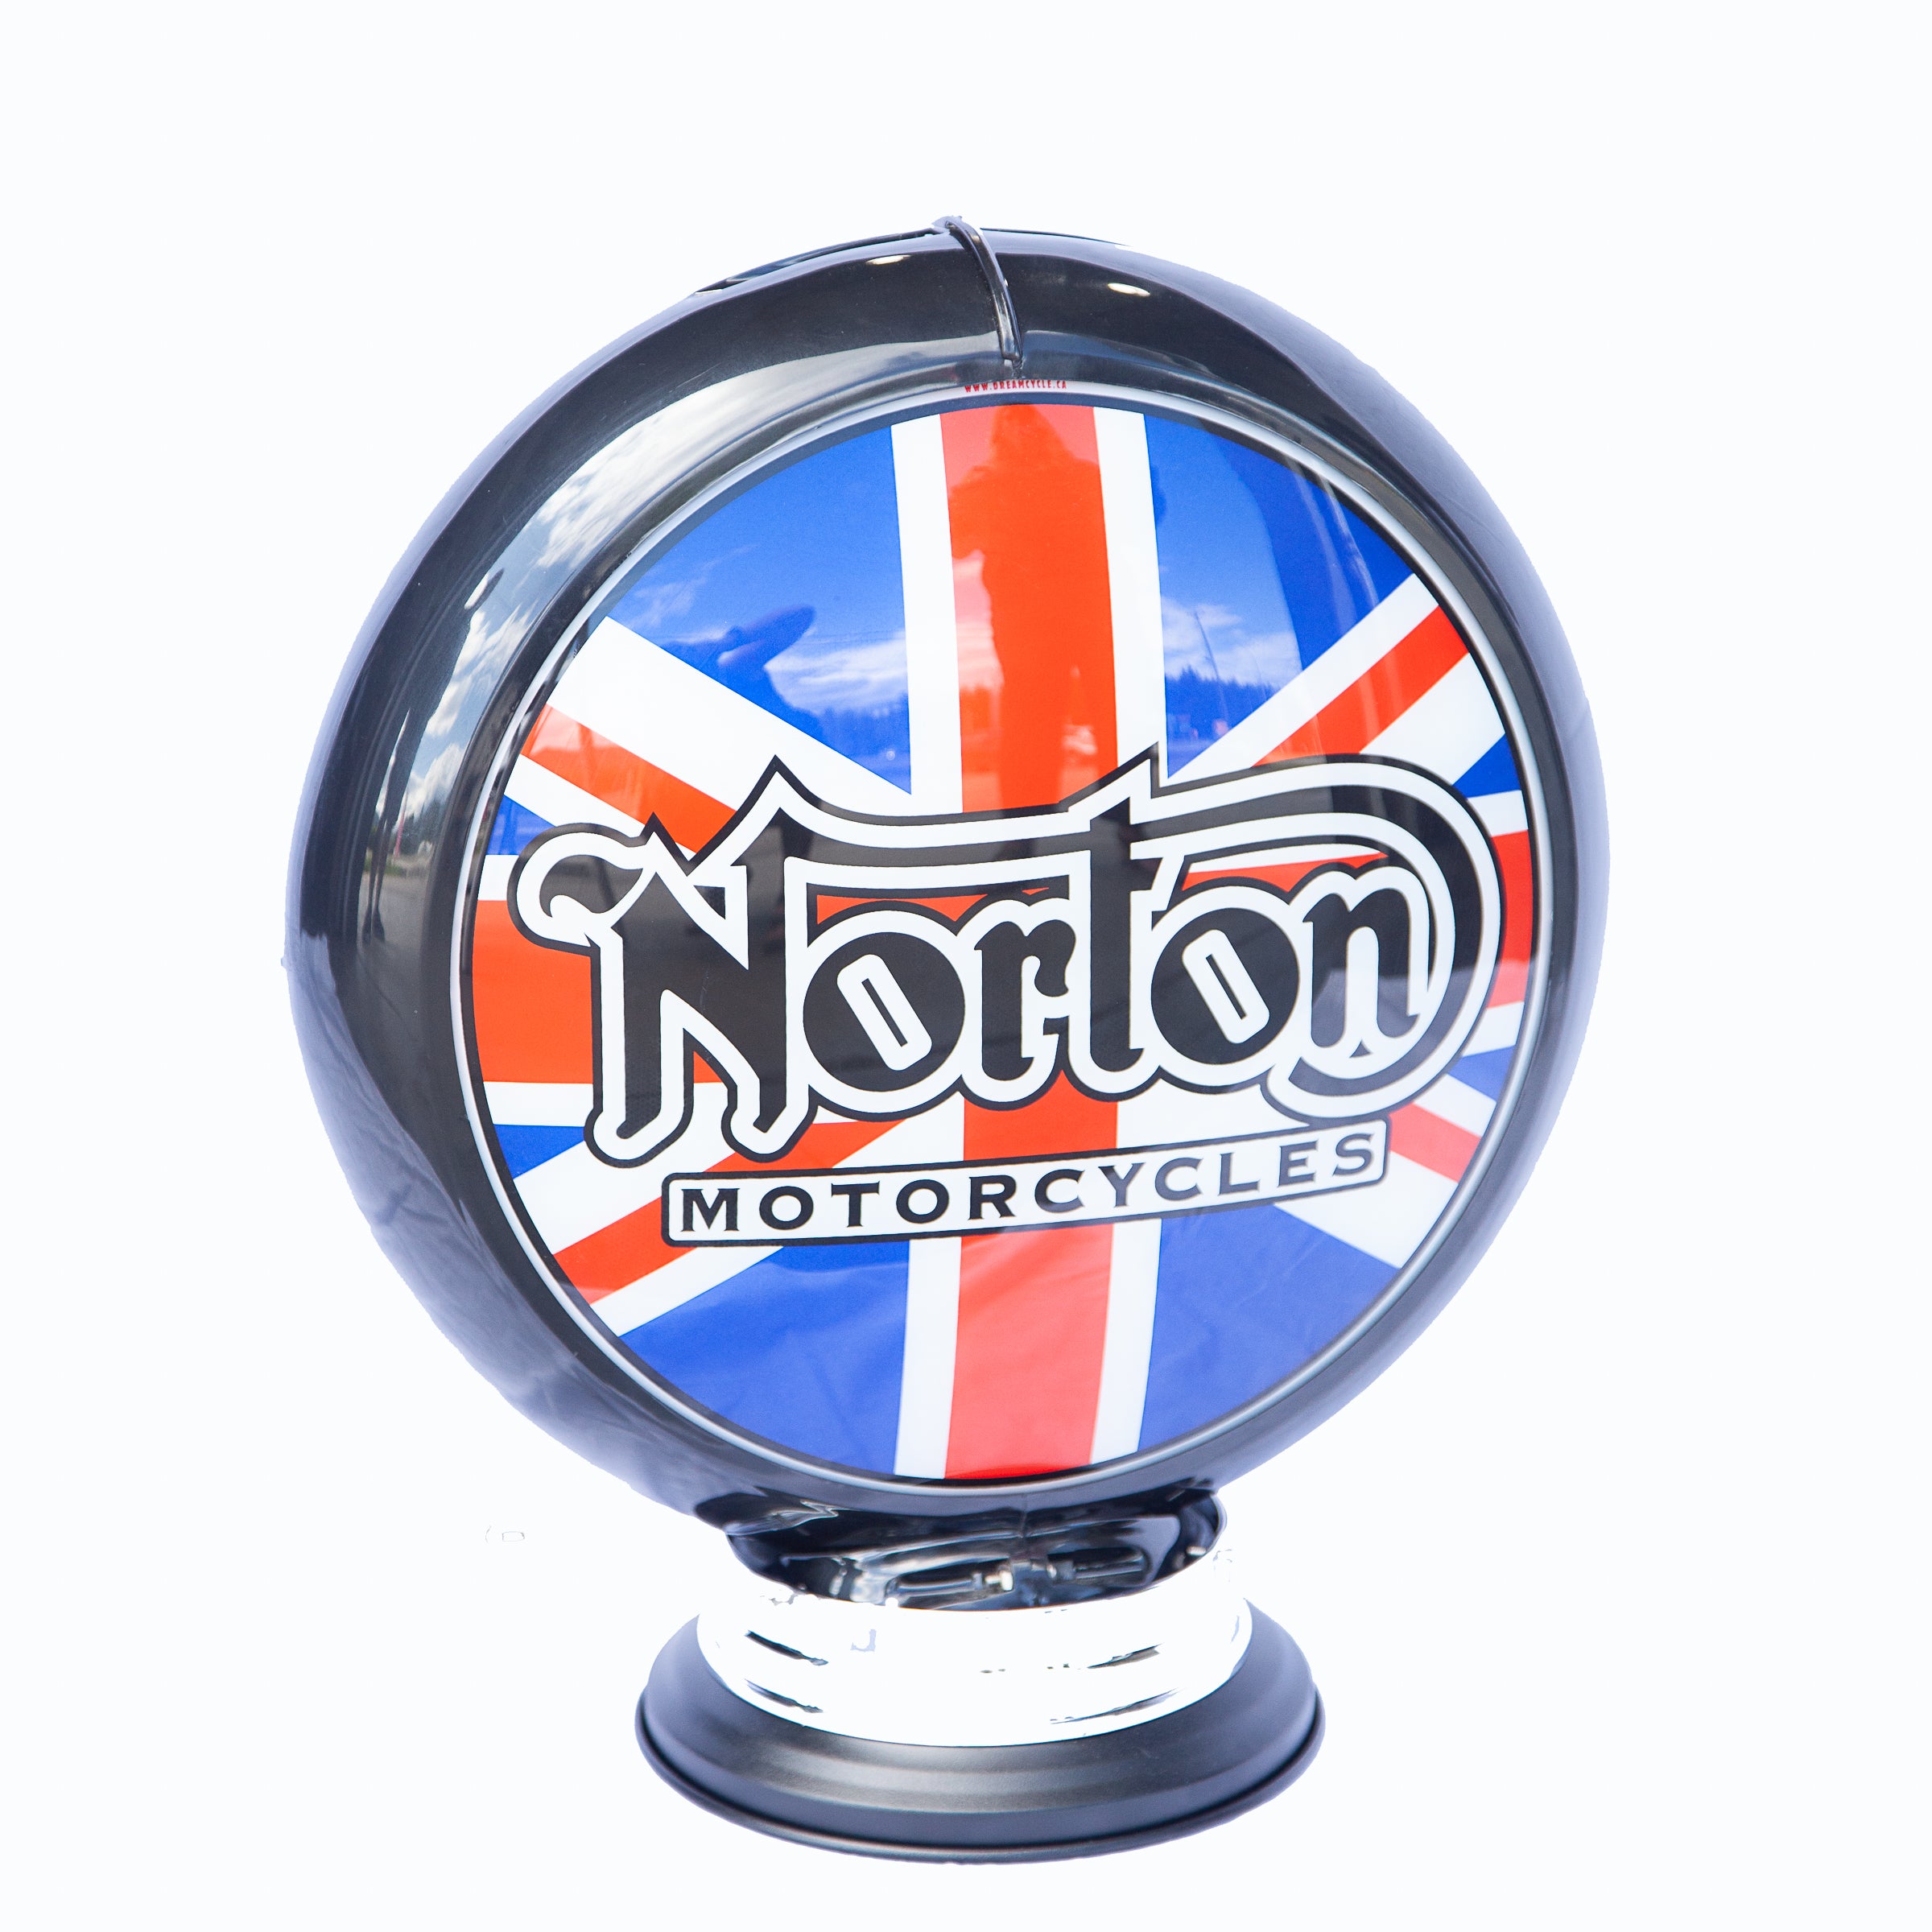 Dreamcycle Motorcycle Museum |   Norton motorcycles globe and base on white background.